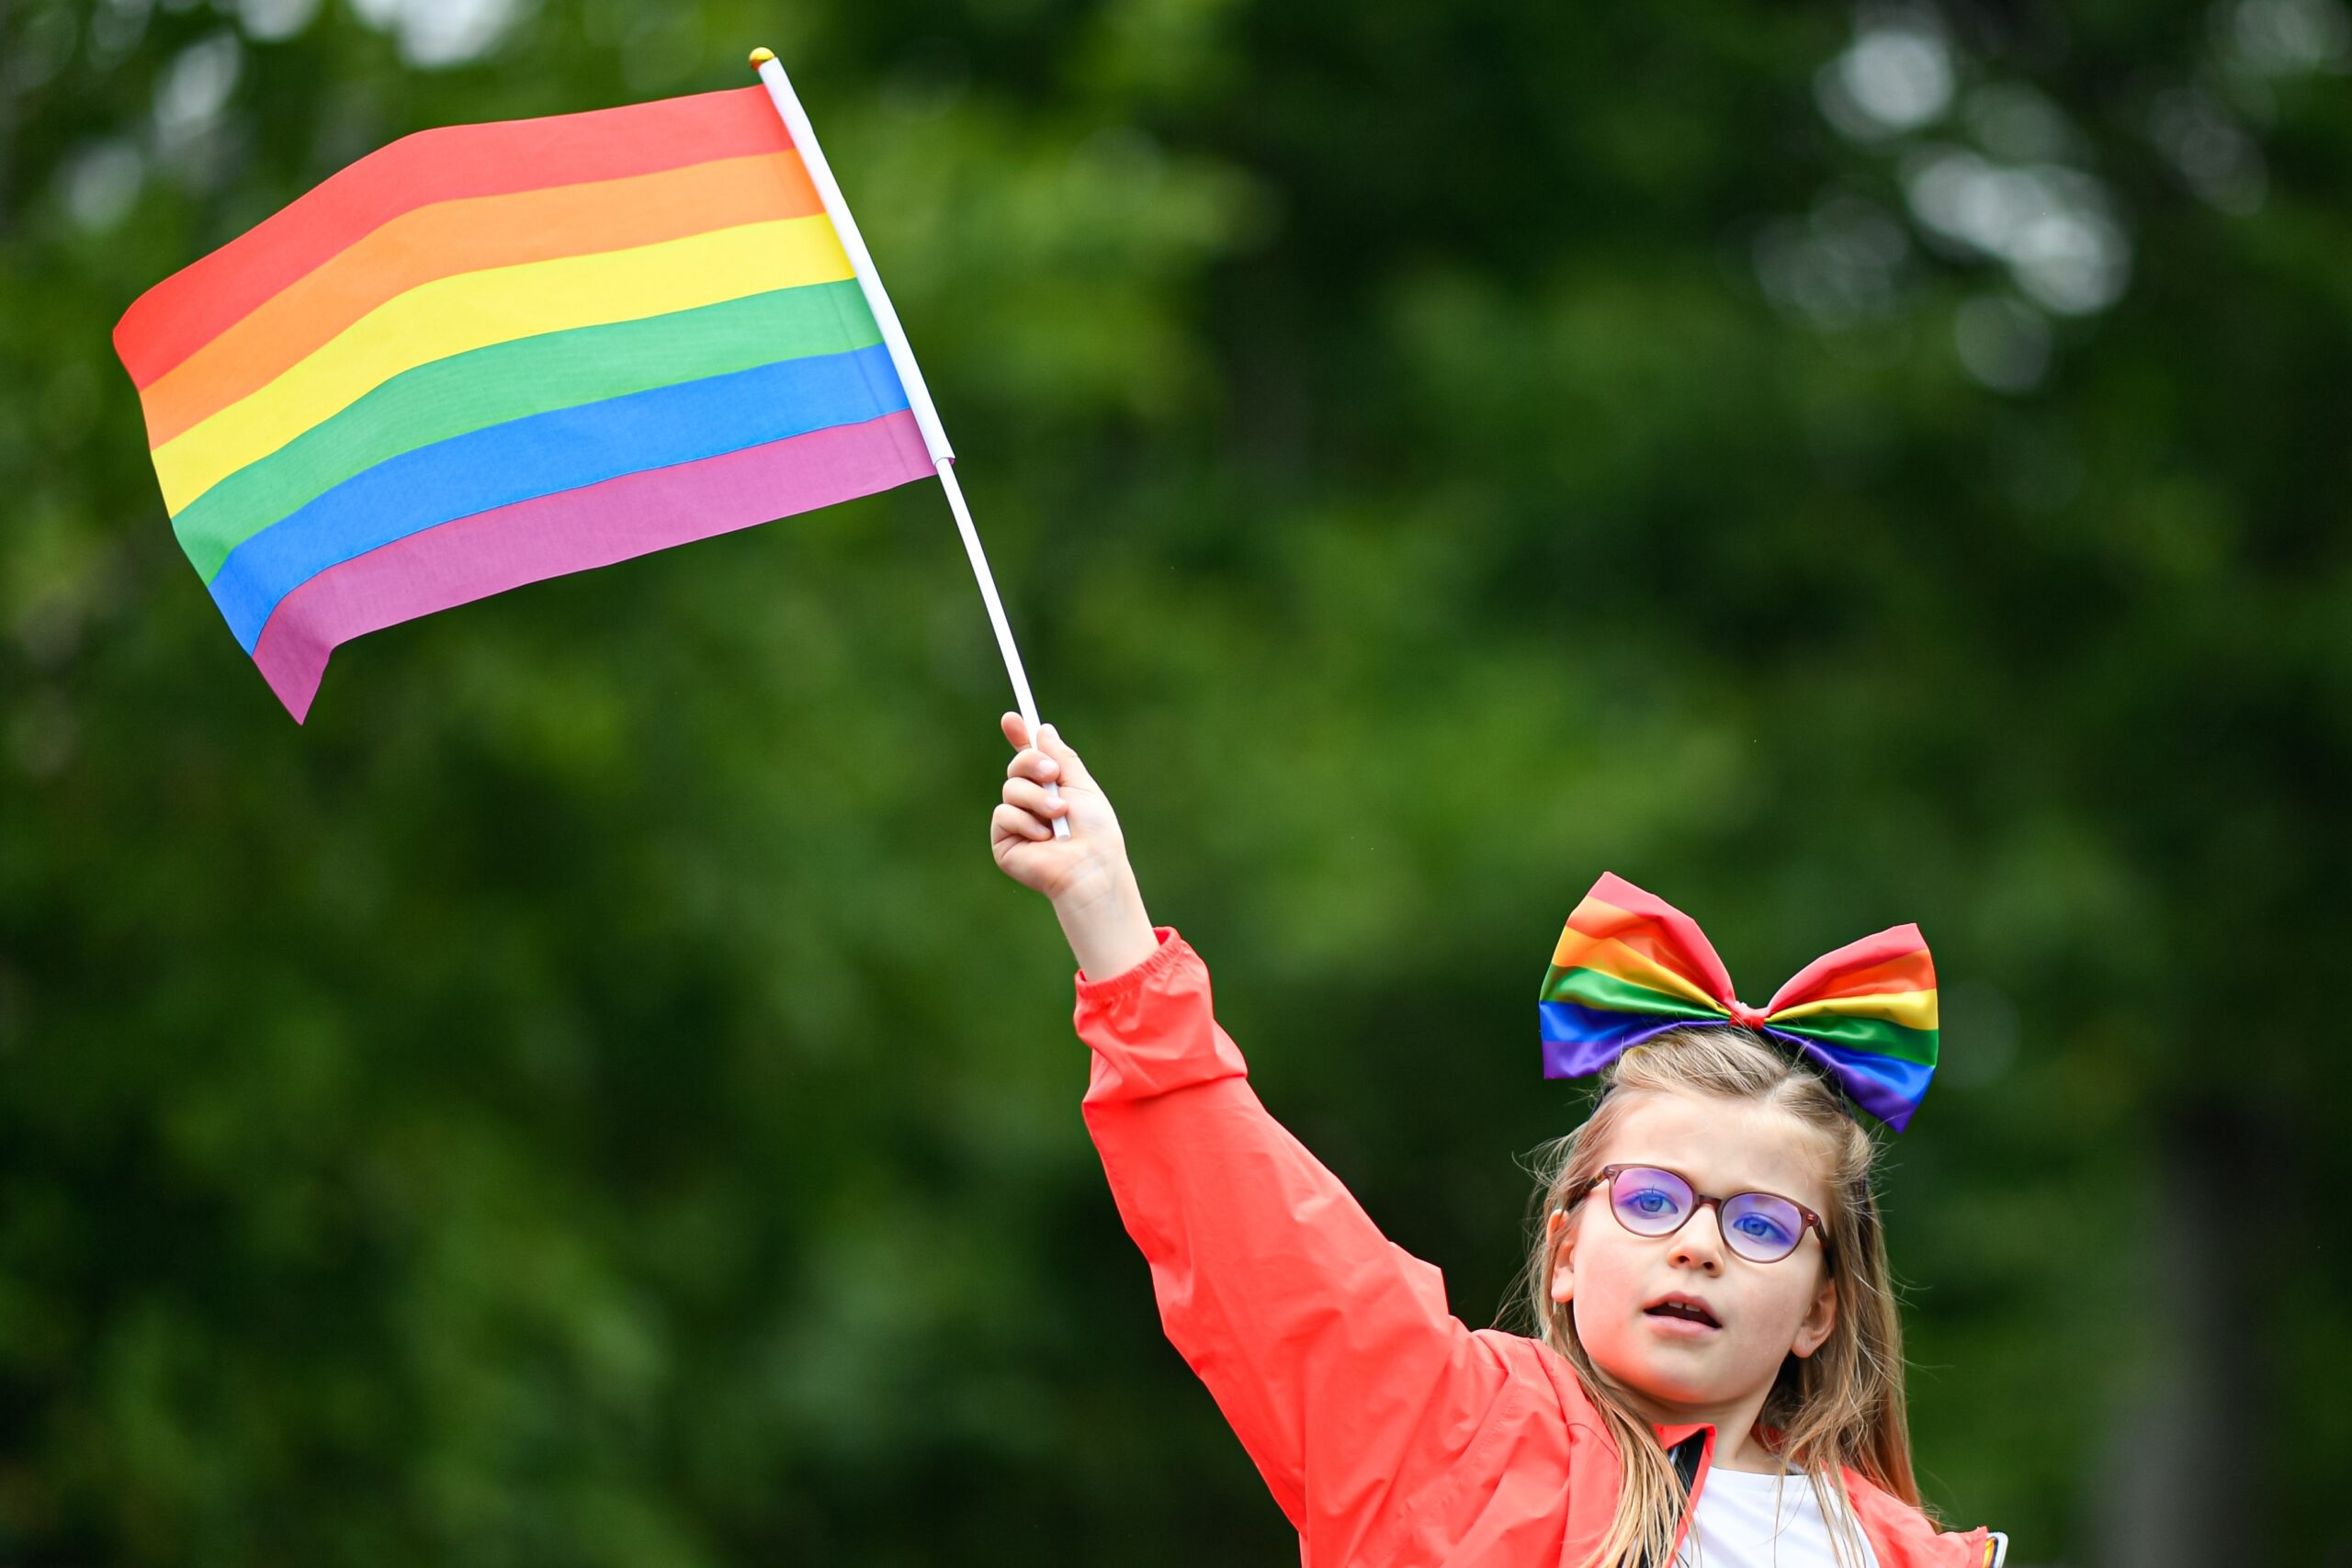 A little girl (child) waving a rainbow flag in the Pride March (Gay Pride Month, "Marche des Fiertes") for the inclusion and rights of the LGBTQI+ in Paris, France on June, 25, 2022.